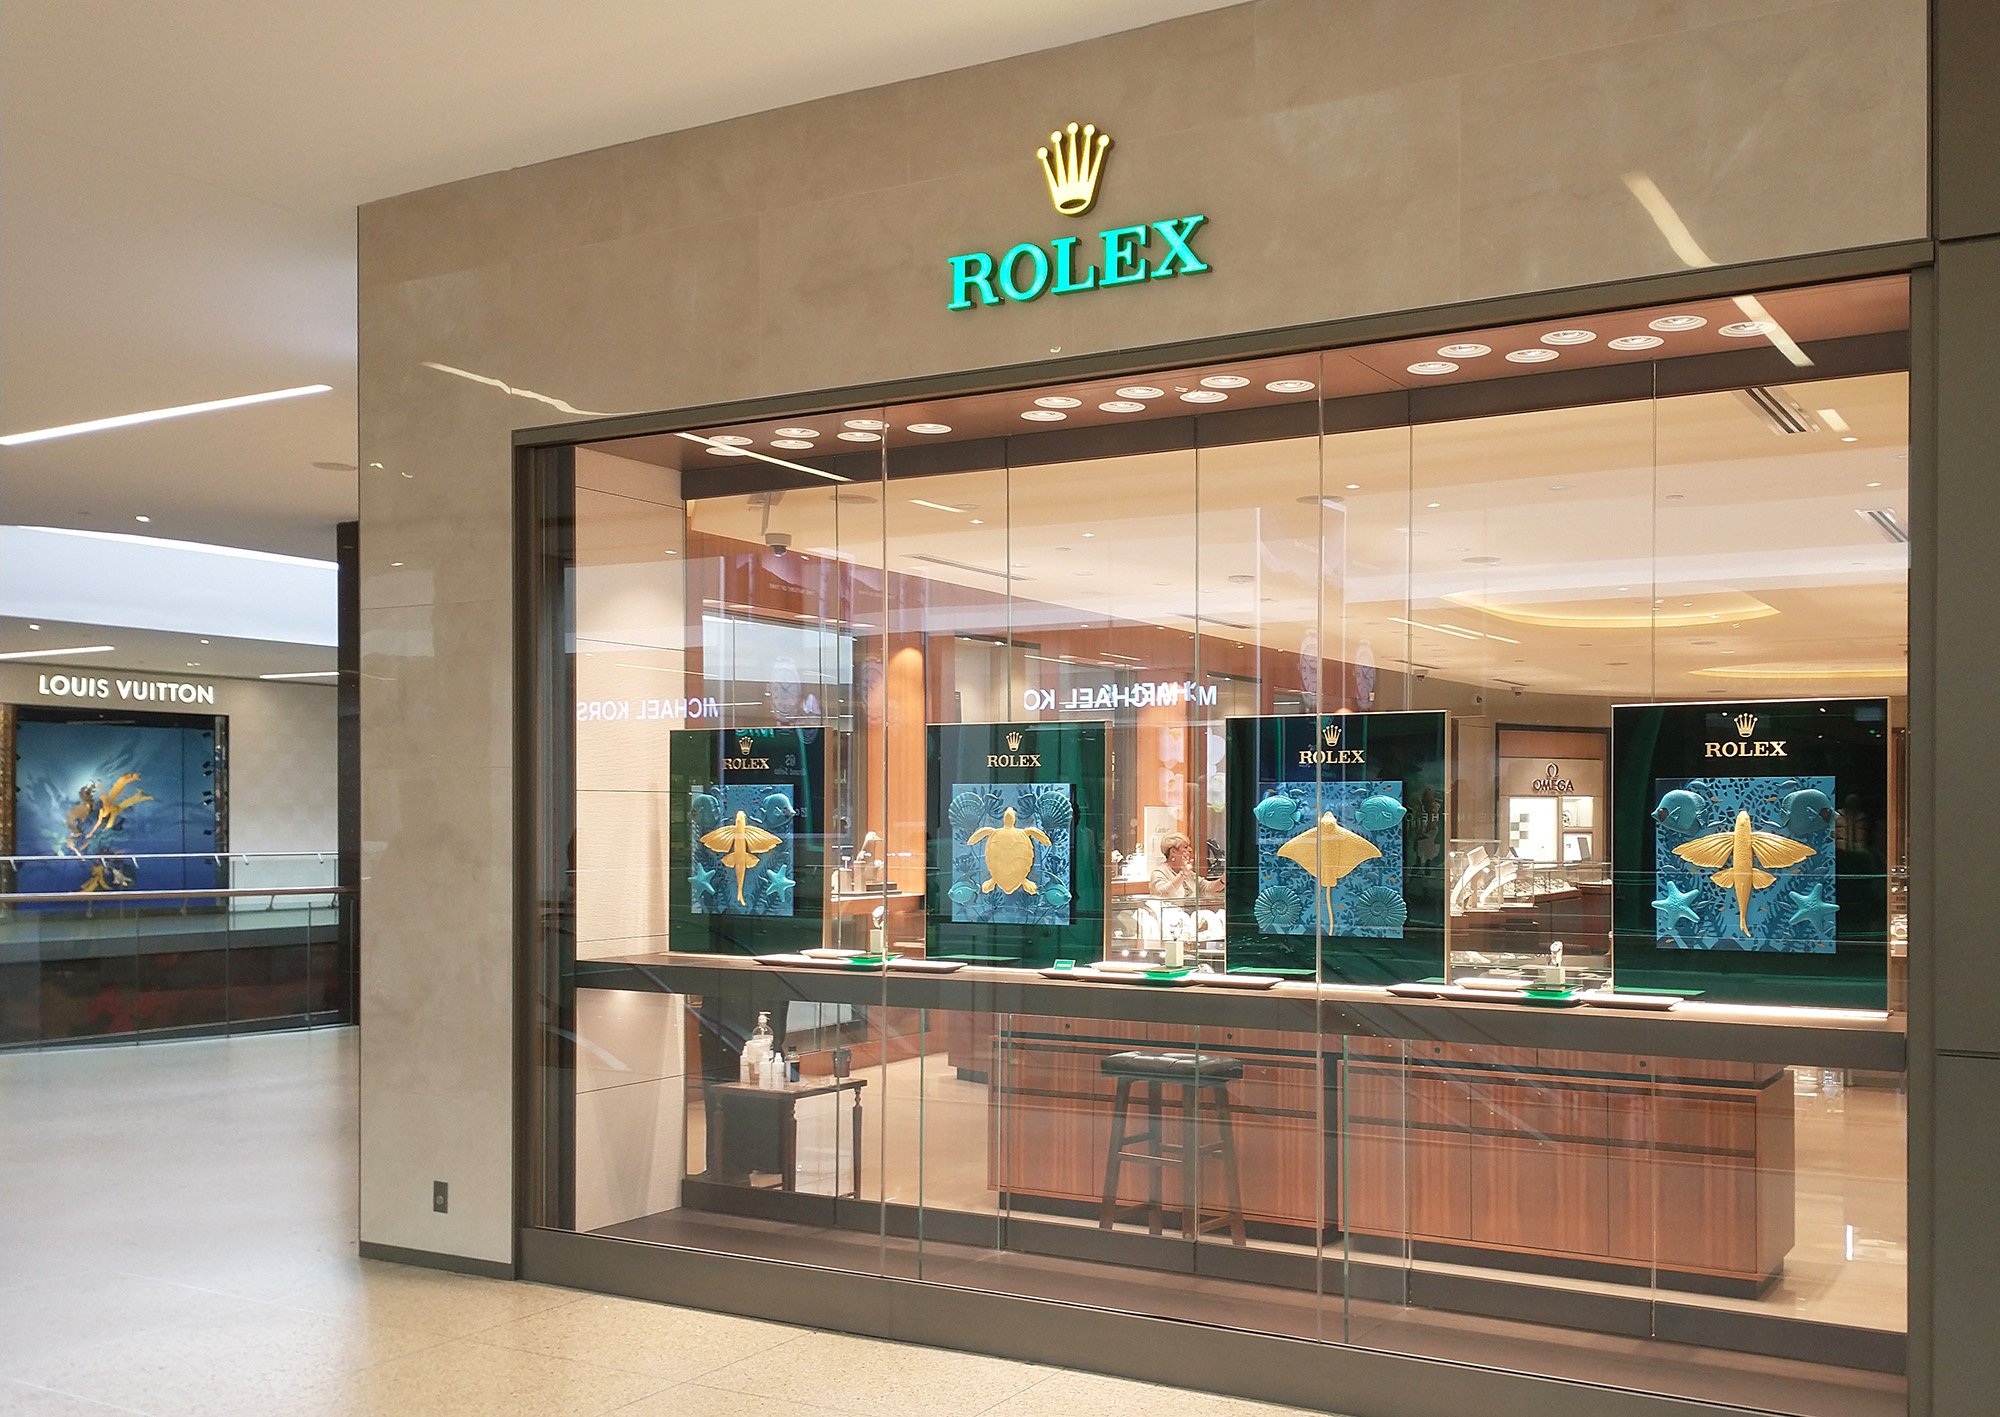 There's a fancy wing with some upper scale stores, like this Rolex one.